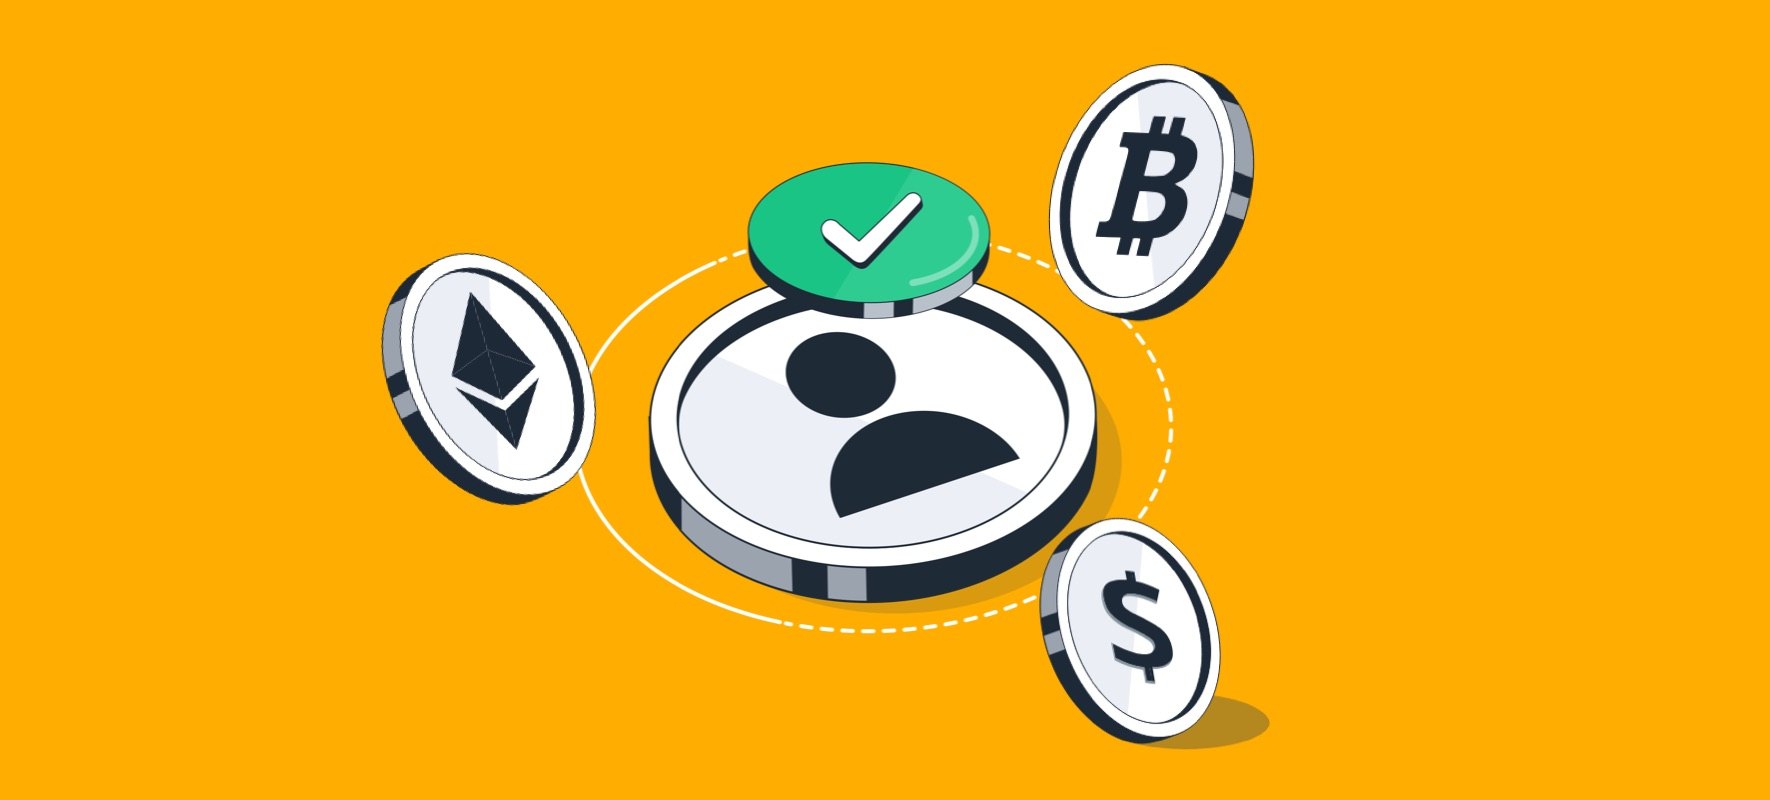 User icon with green tick mark placed within a dotten circle. There are three crypto coins surrounding it, illustrating employee background screening in the crypto industry.